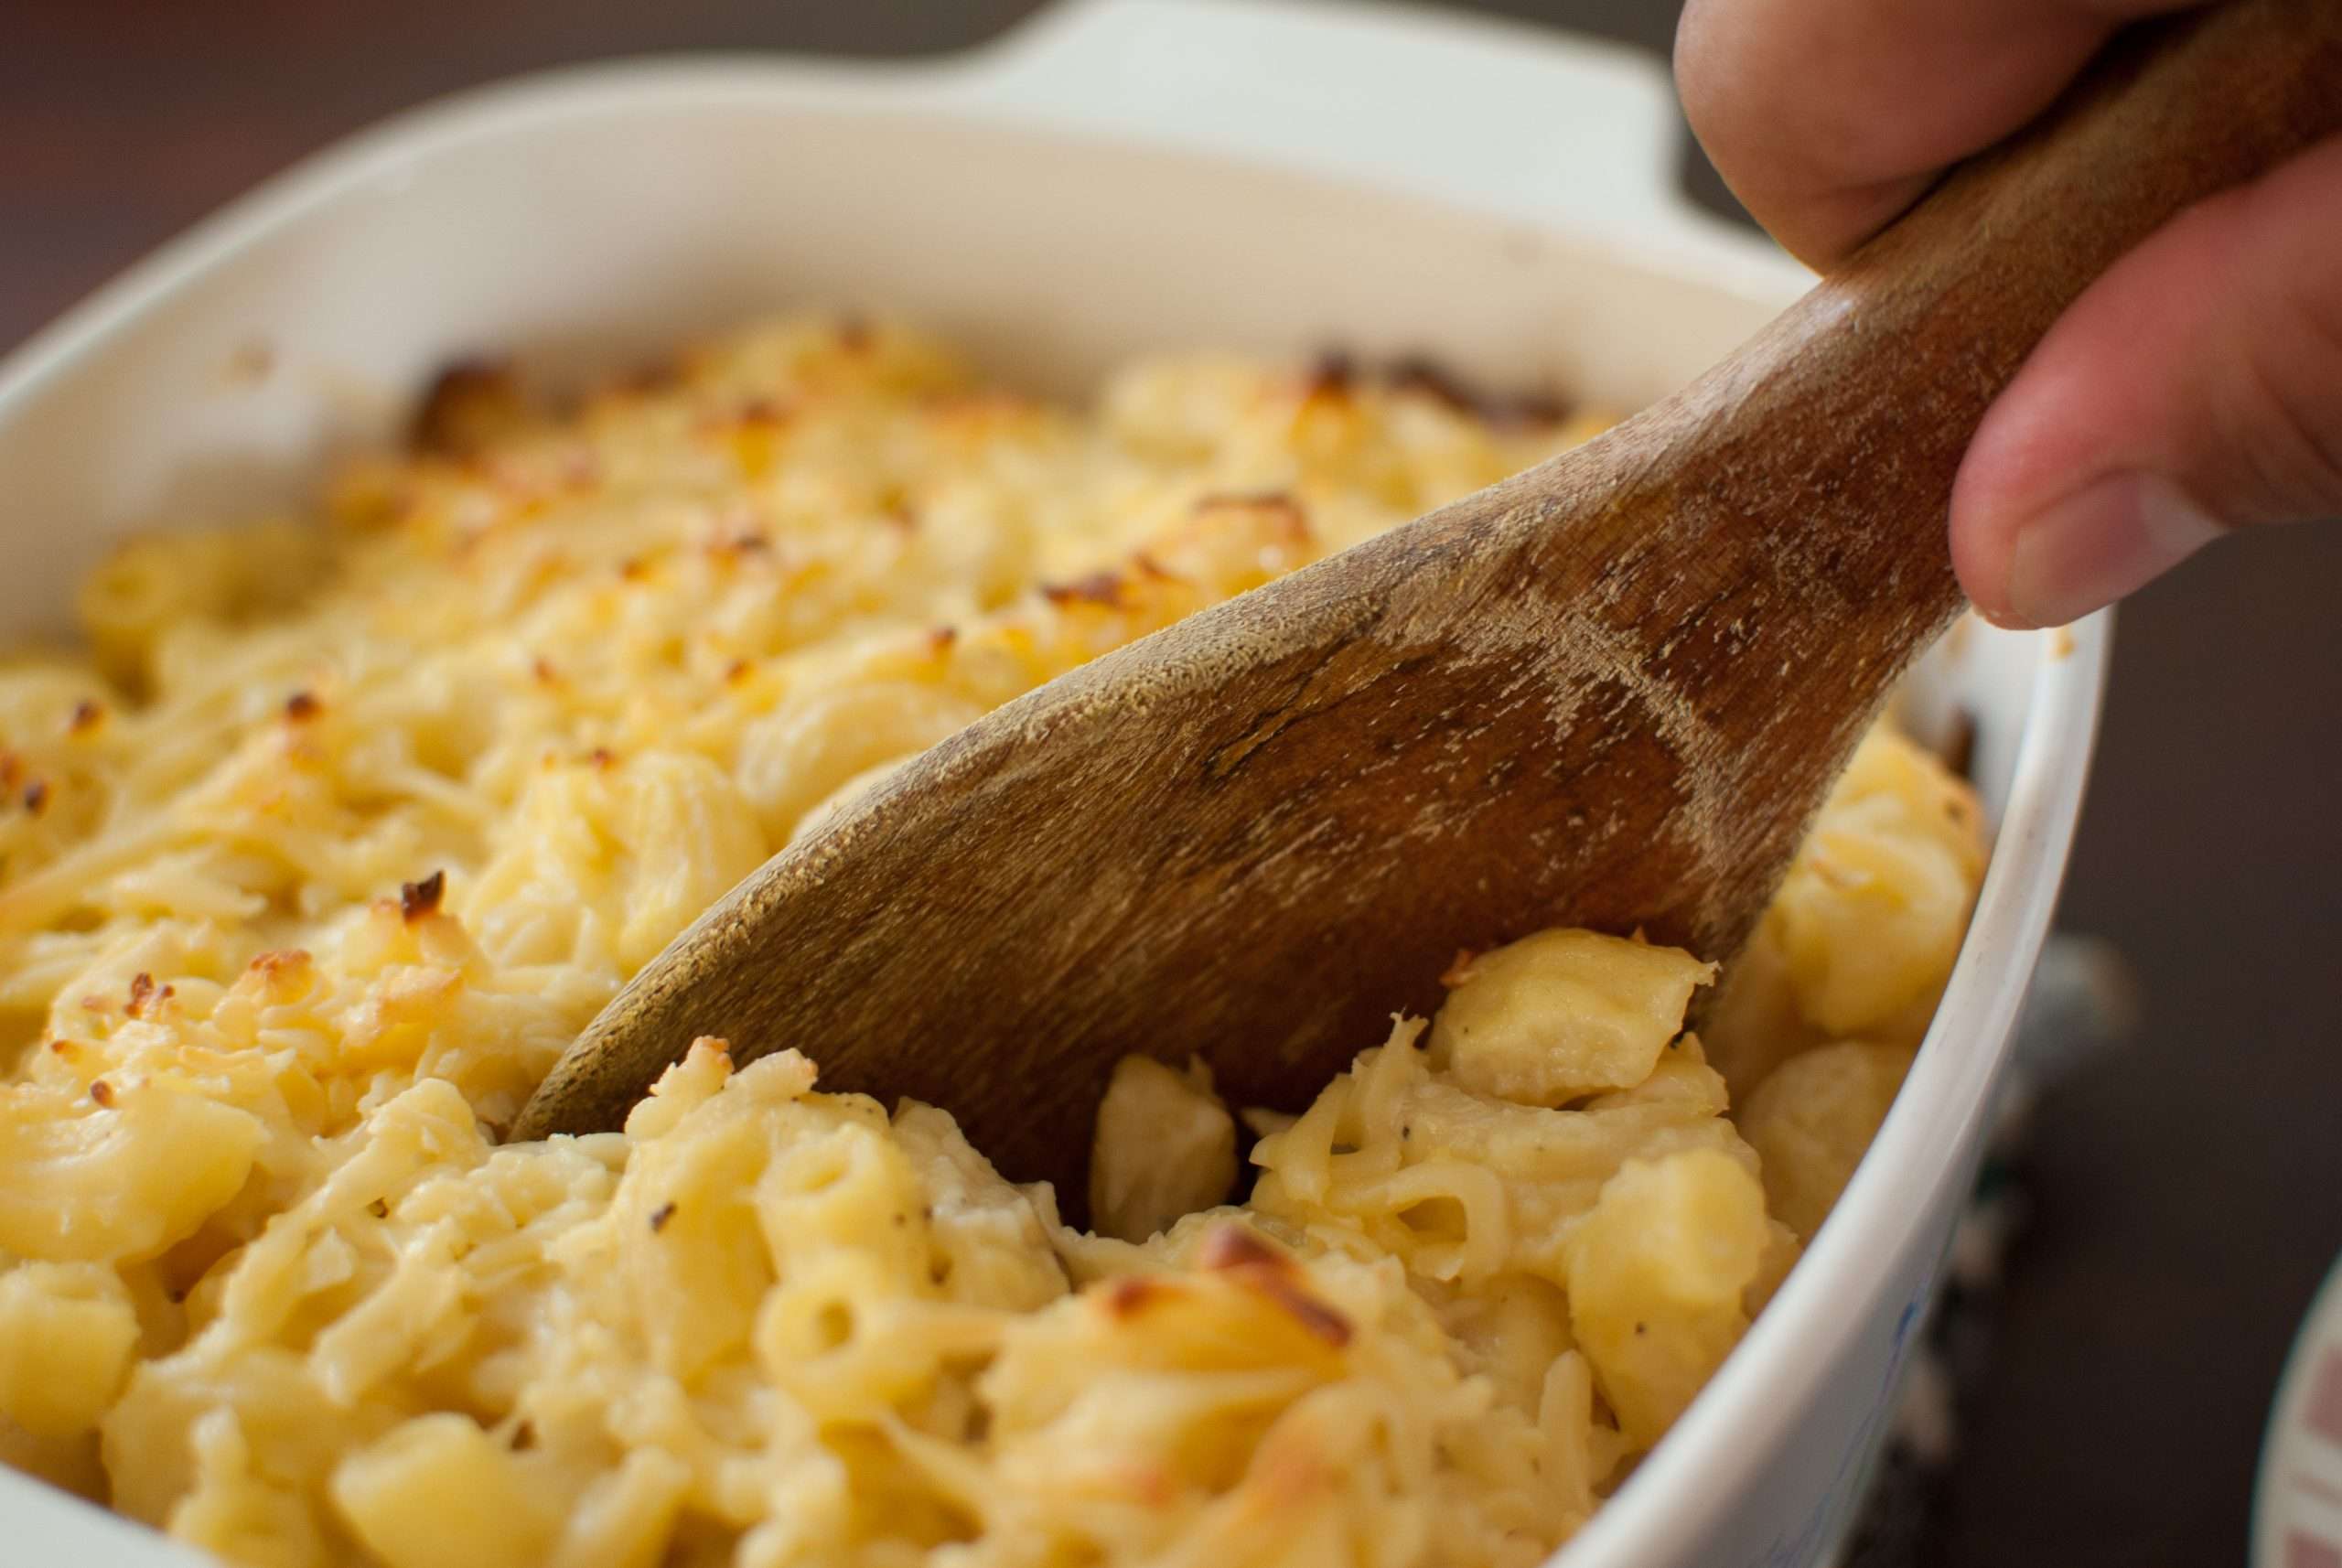 How to Make Baked Macaroni and Cheese (with Pictures)